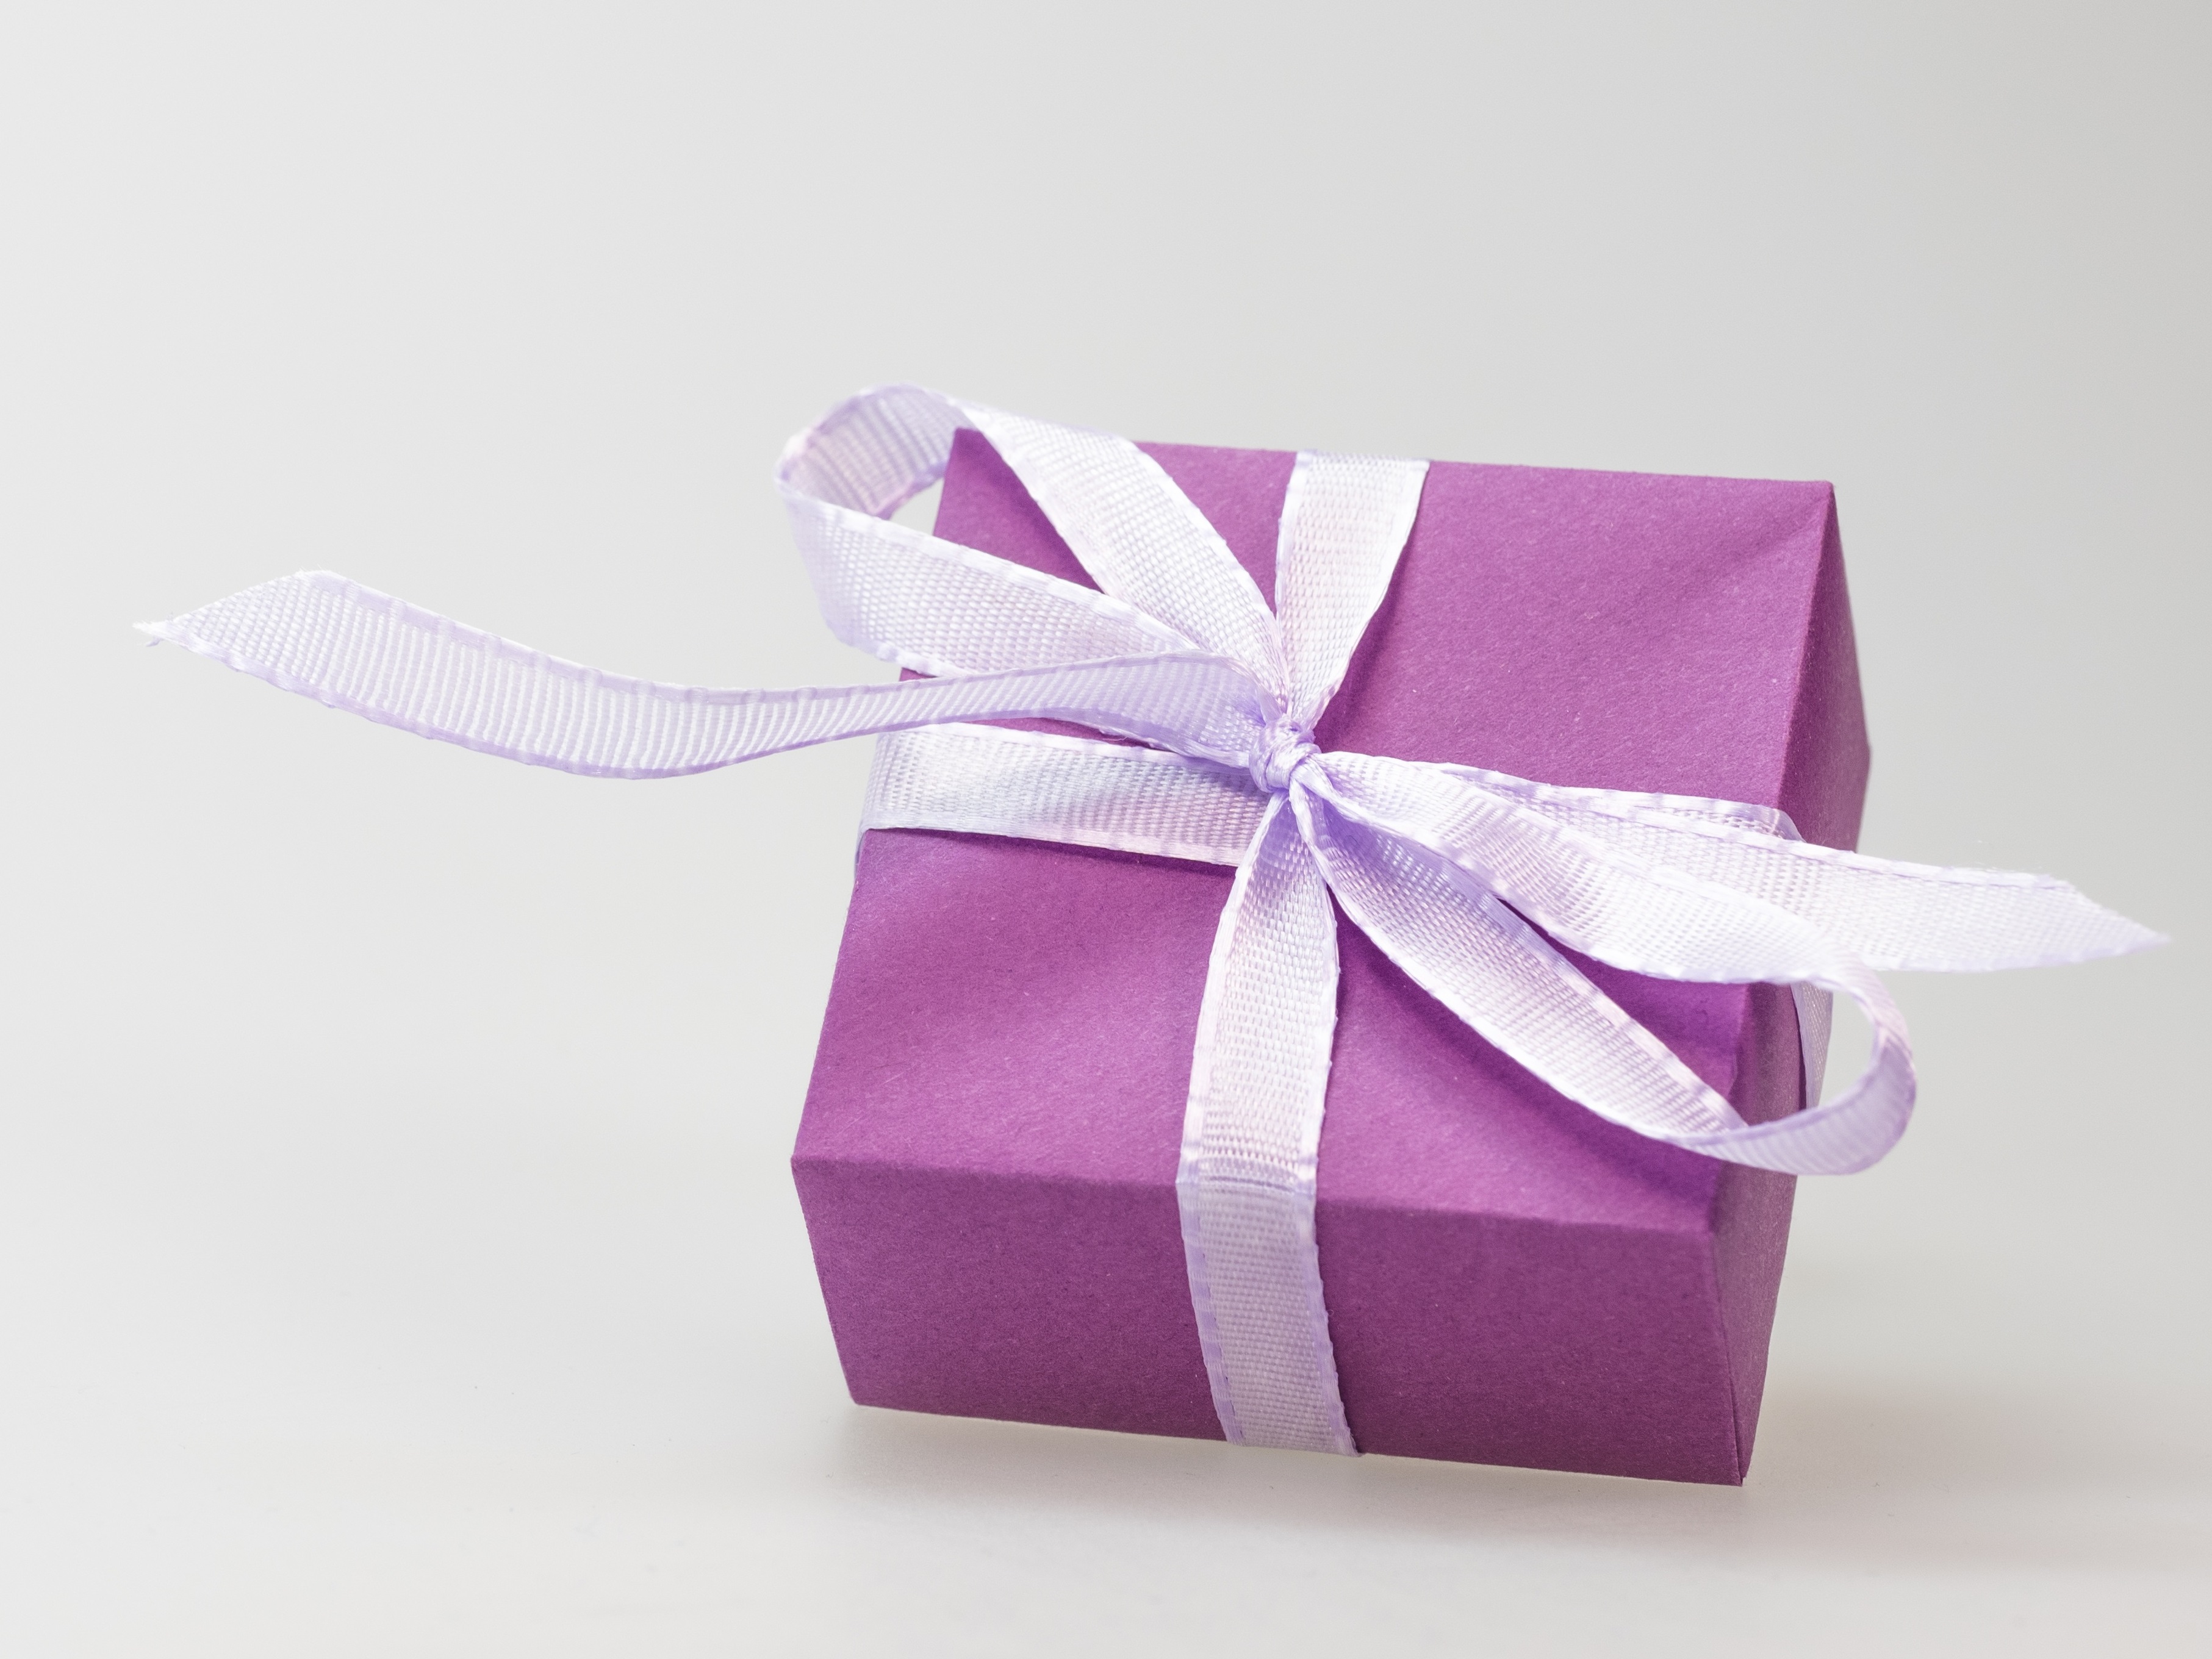 A picture of a present wrapped in solid purple paper and tied in a white ribbon.